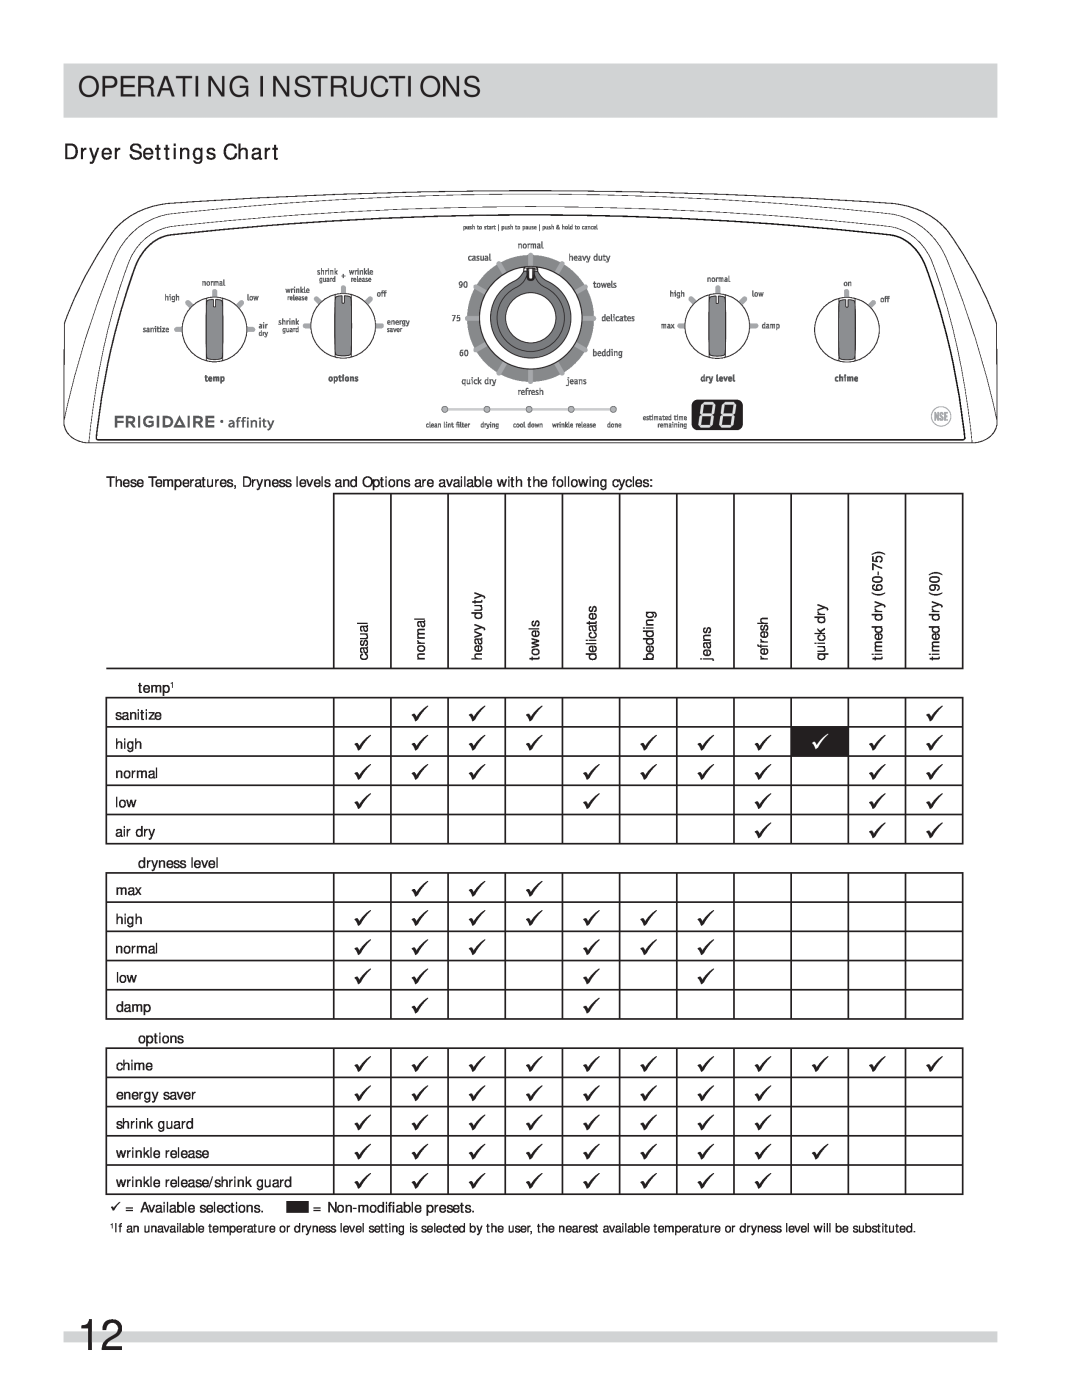 Frigidaire FARE1011MW important safety instructions Operating Instructions, Dryer Settings Chart 